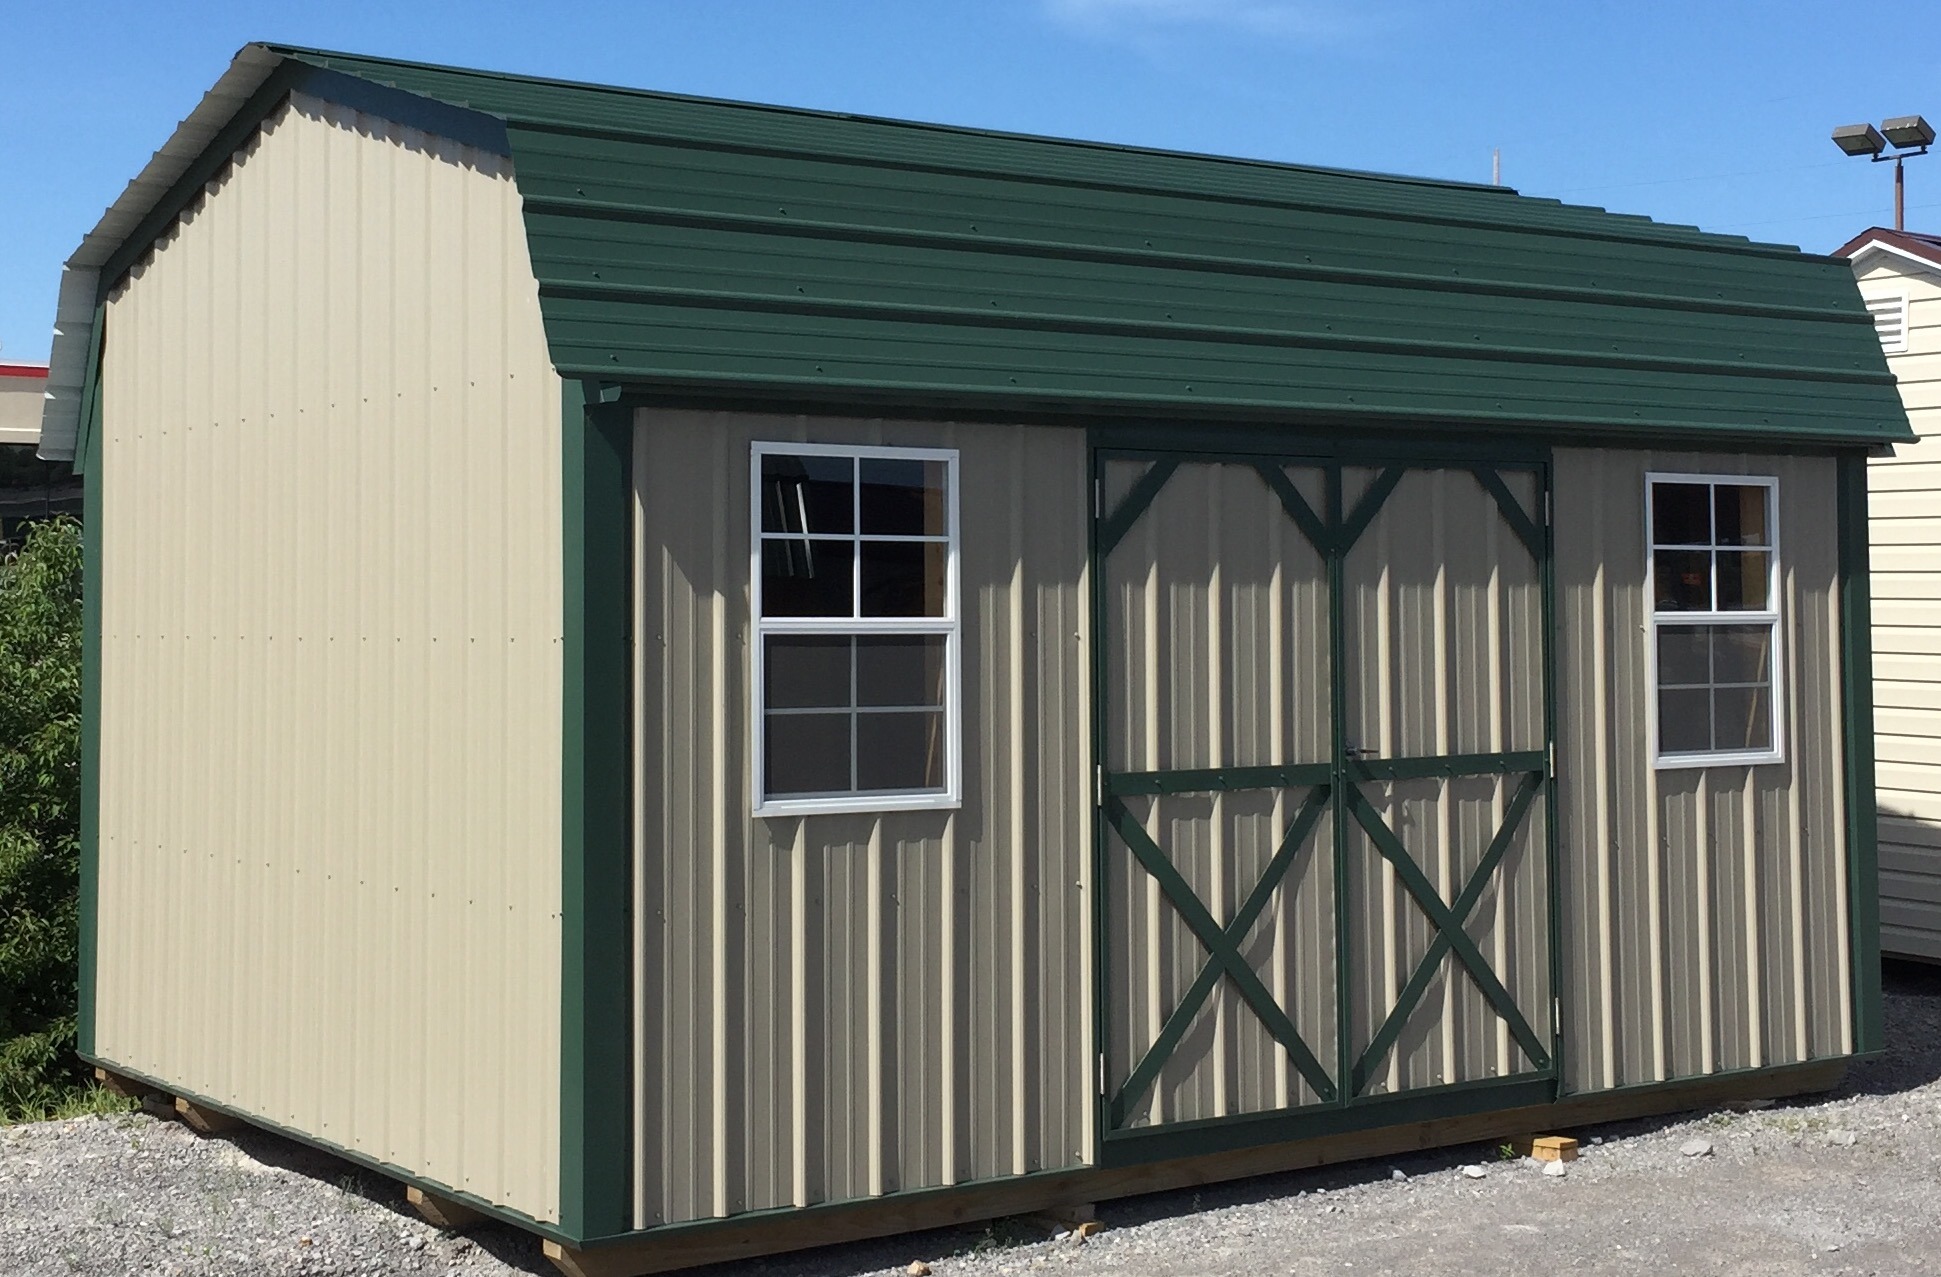 Tan metal side lofted barn with green trim and roof